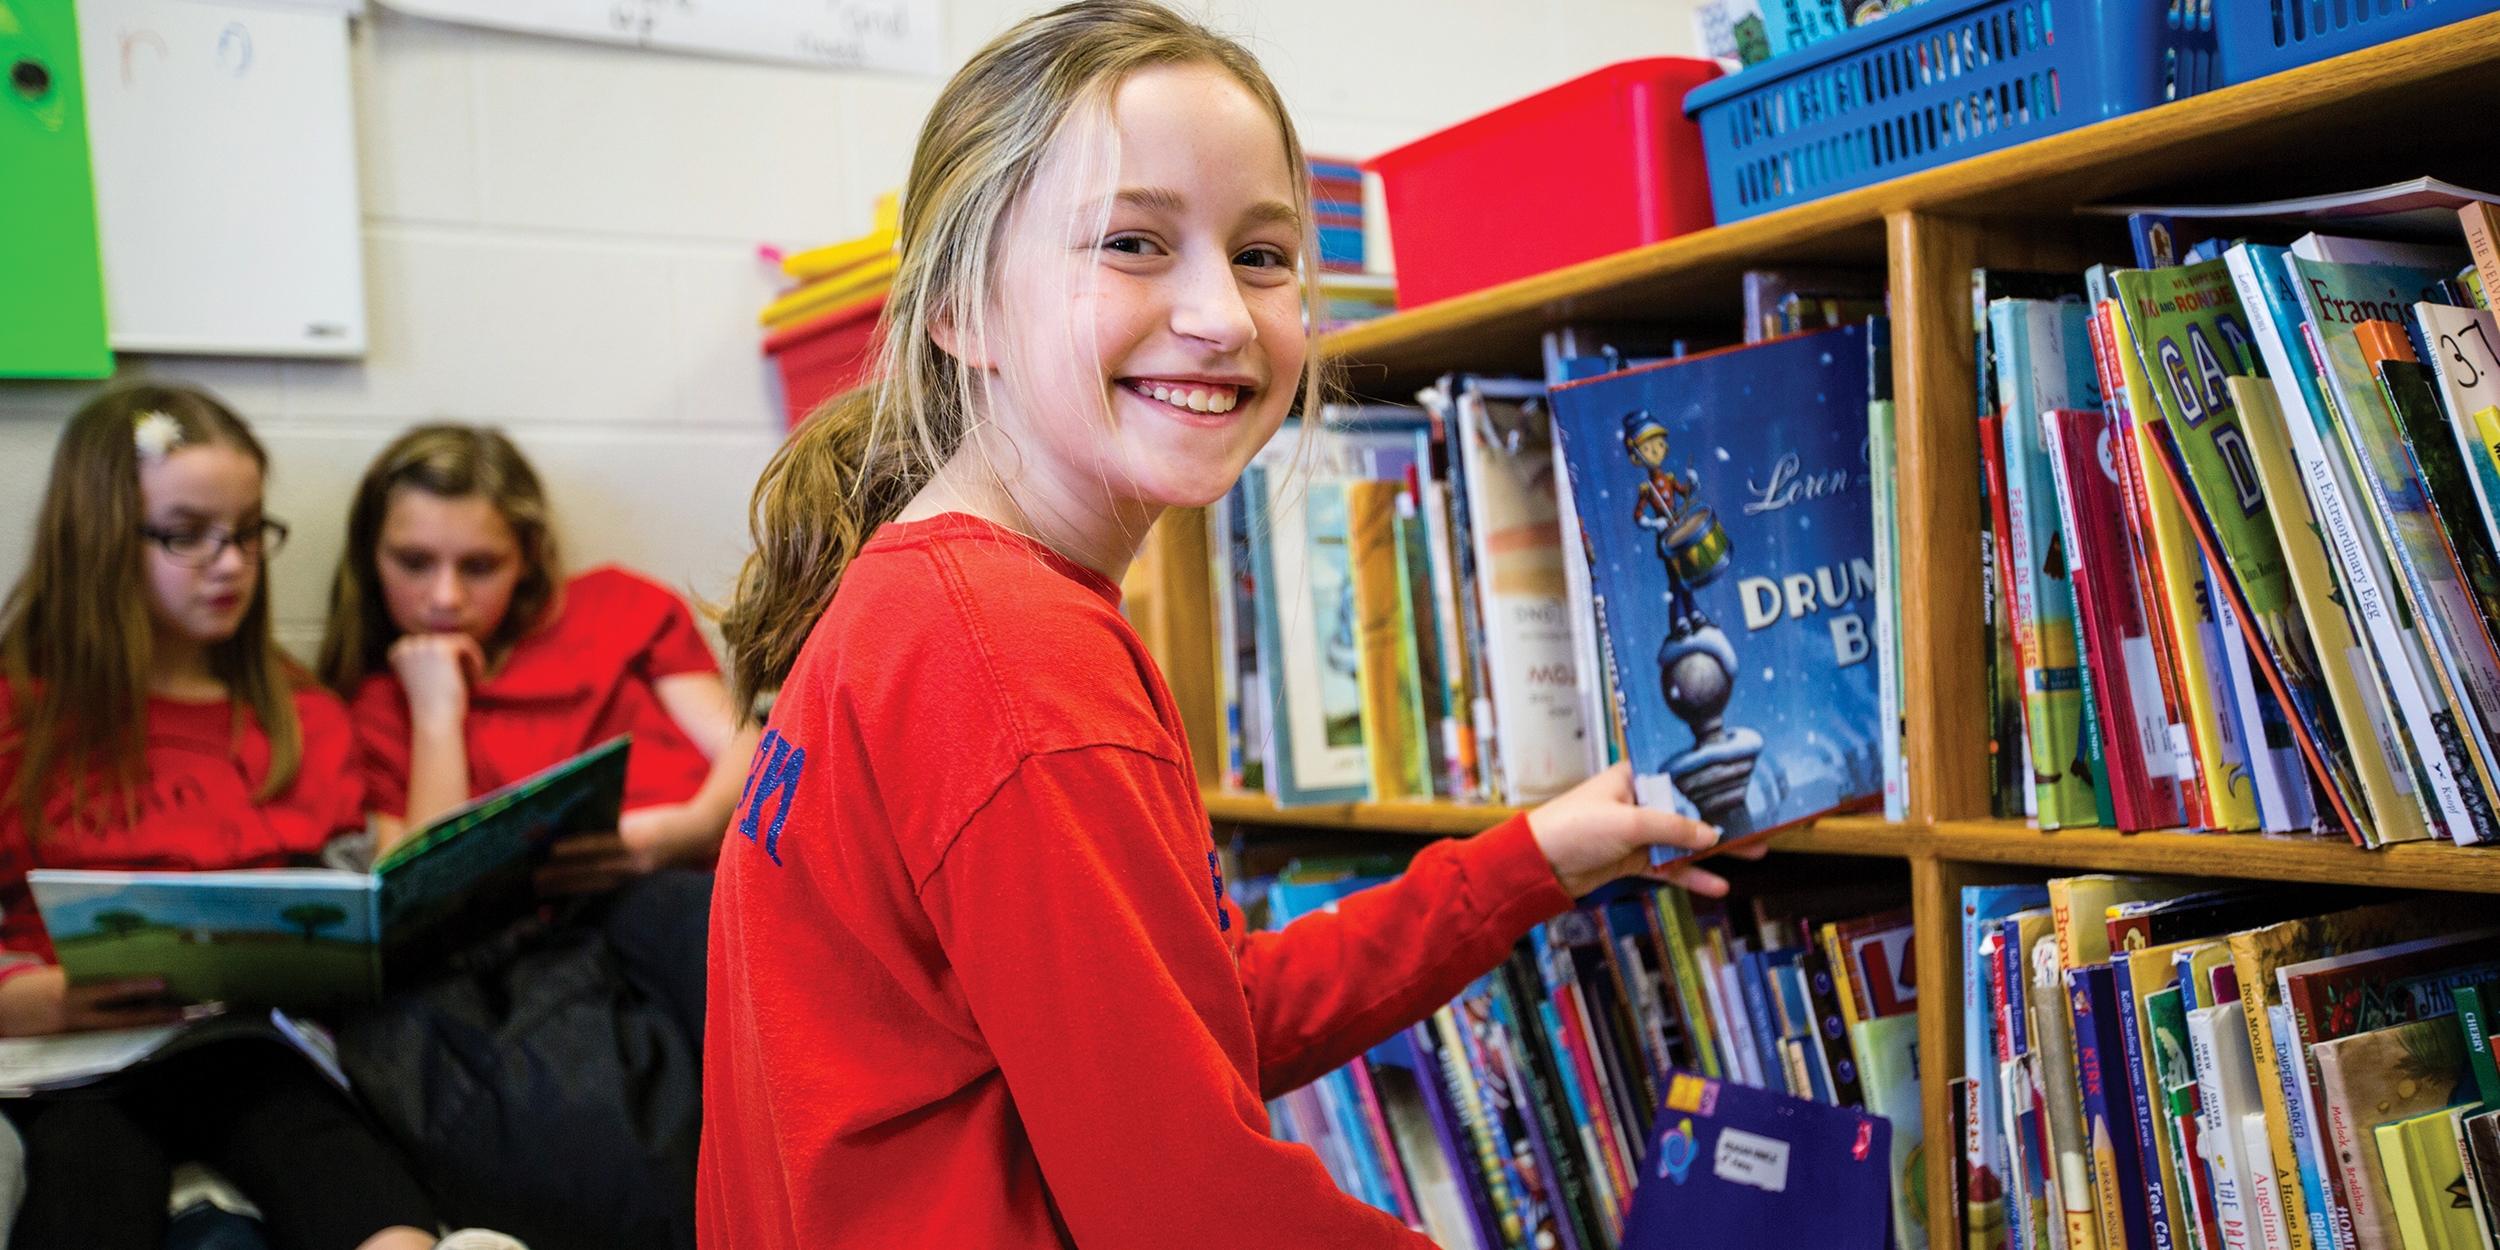 A smiling 10-year-old girl picks a book off a shelf at an in-school literacy program, in Whitley County, Kentucky. Photo credit: Victoria Zegler/Save the Children, December 2017.